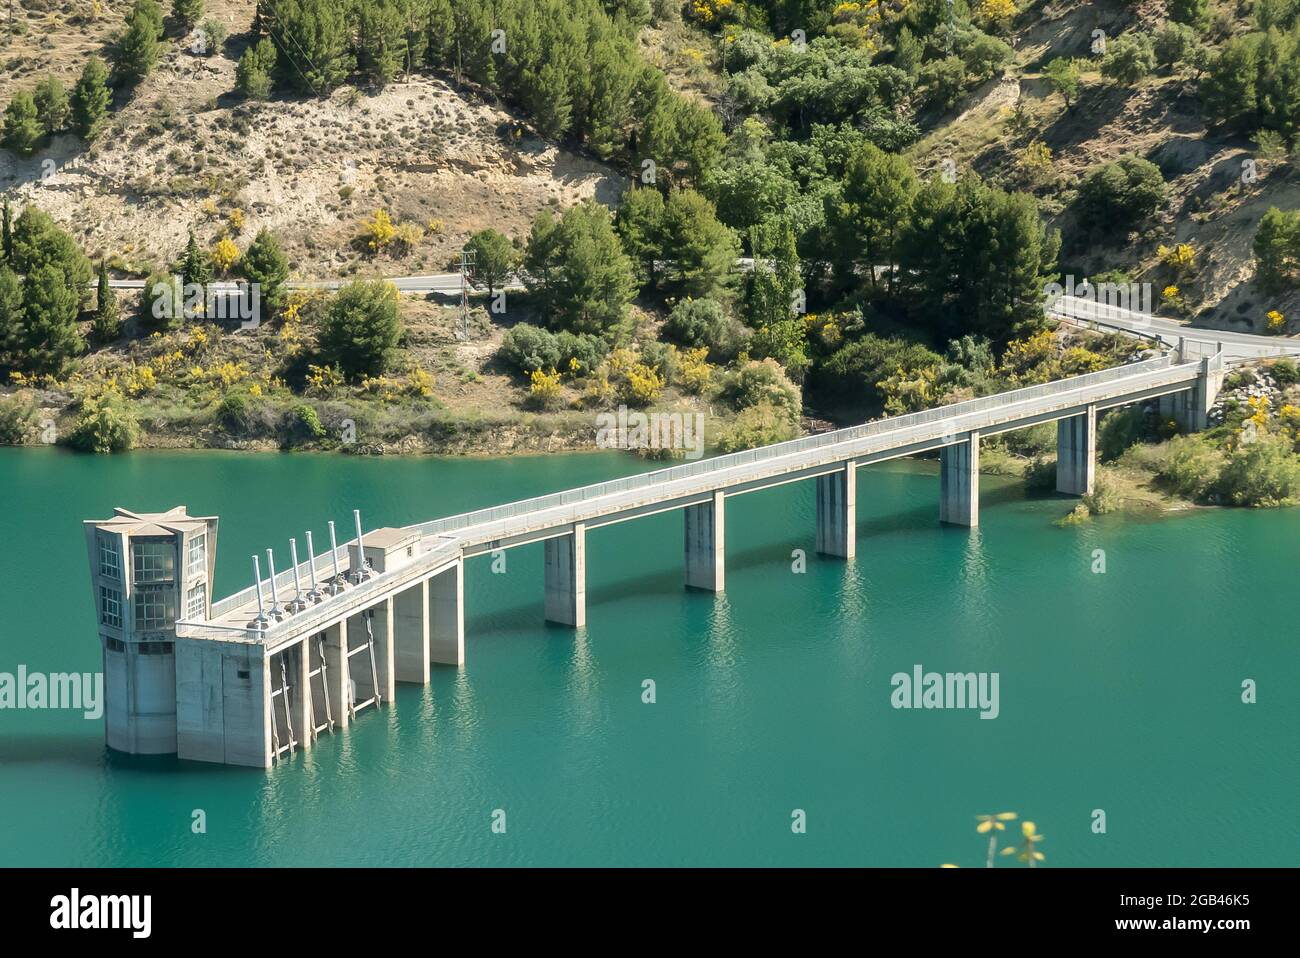 Granada in Spain: the turquoise waters of the Embalse de Canales. Stock Photo